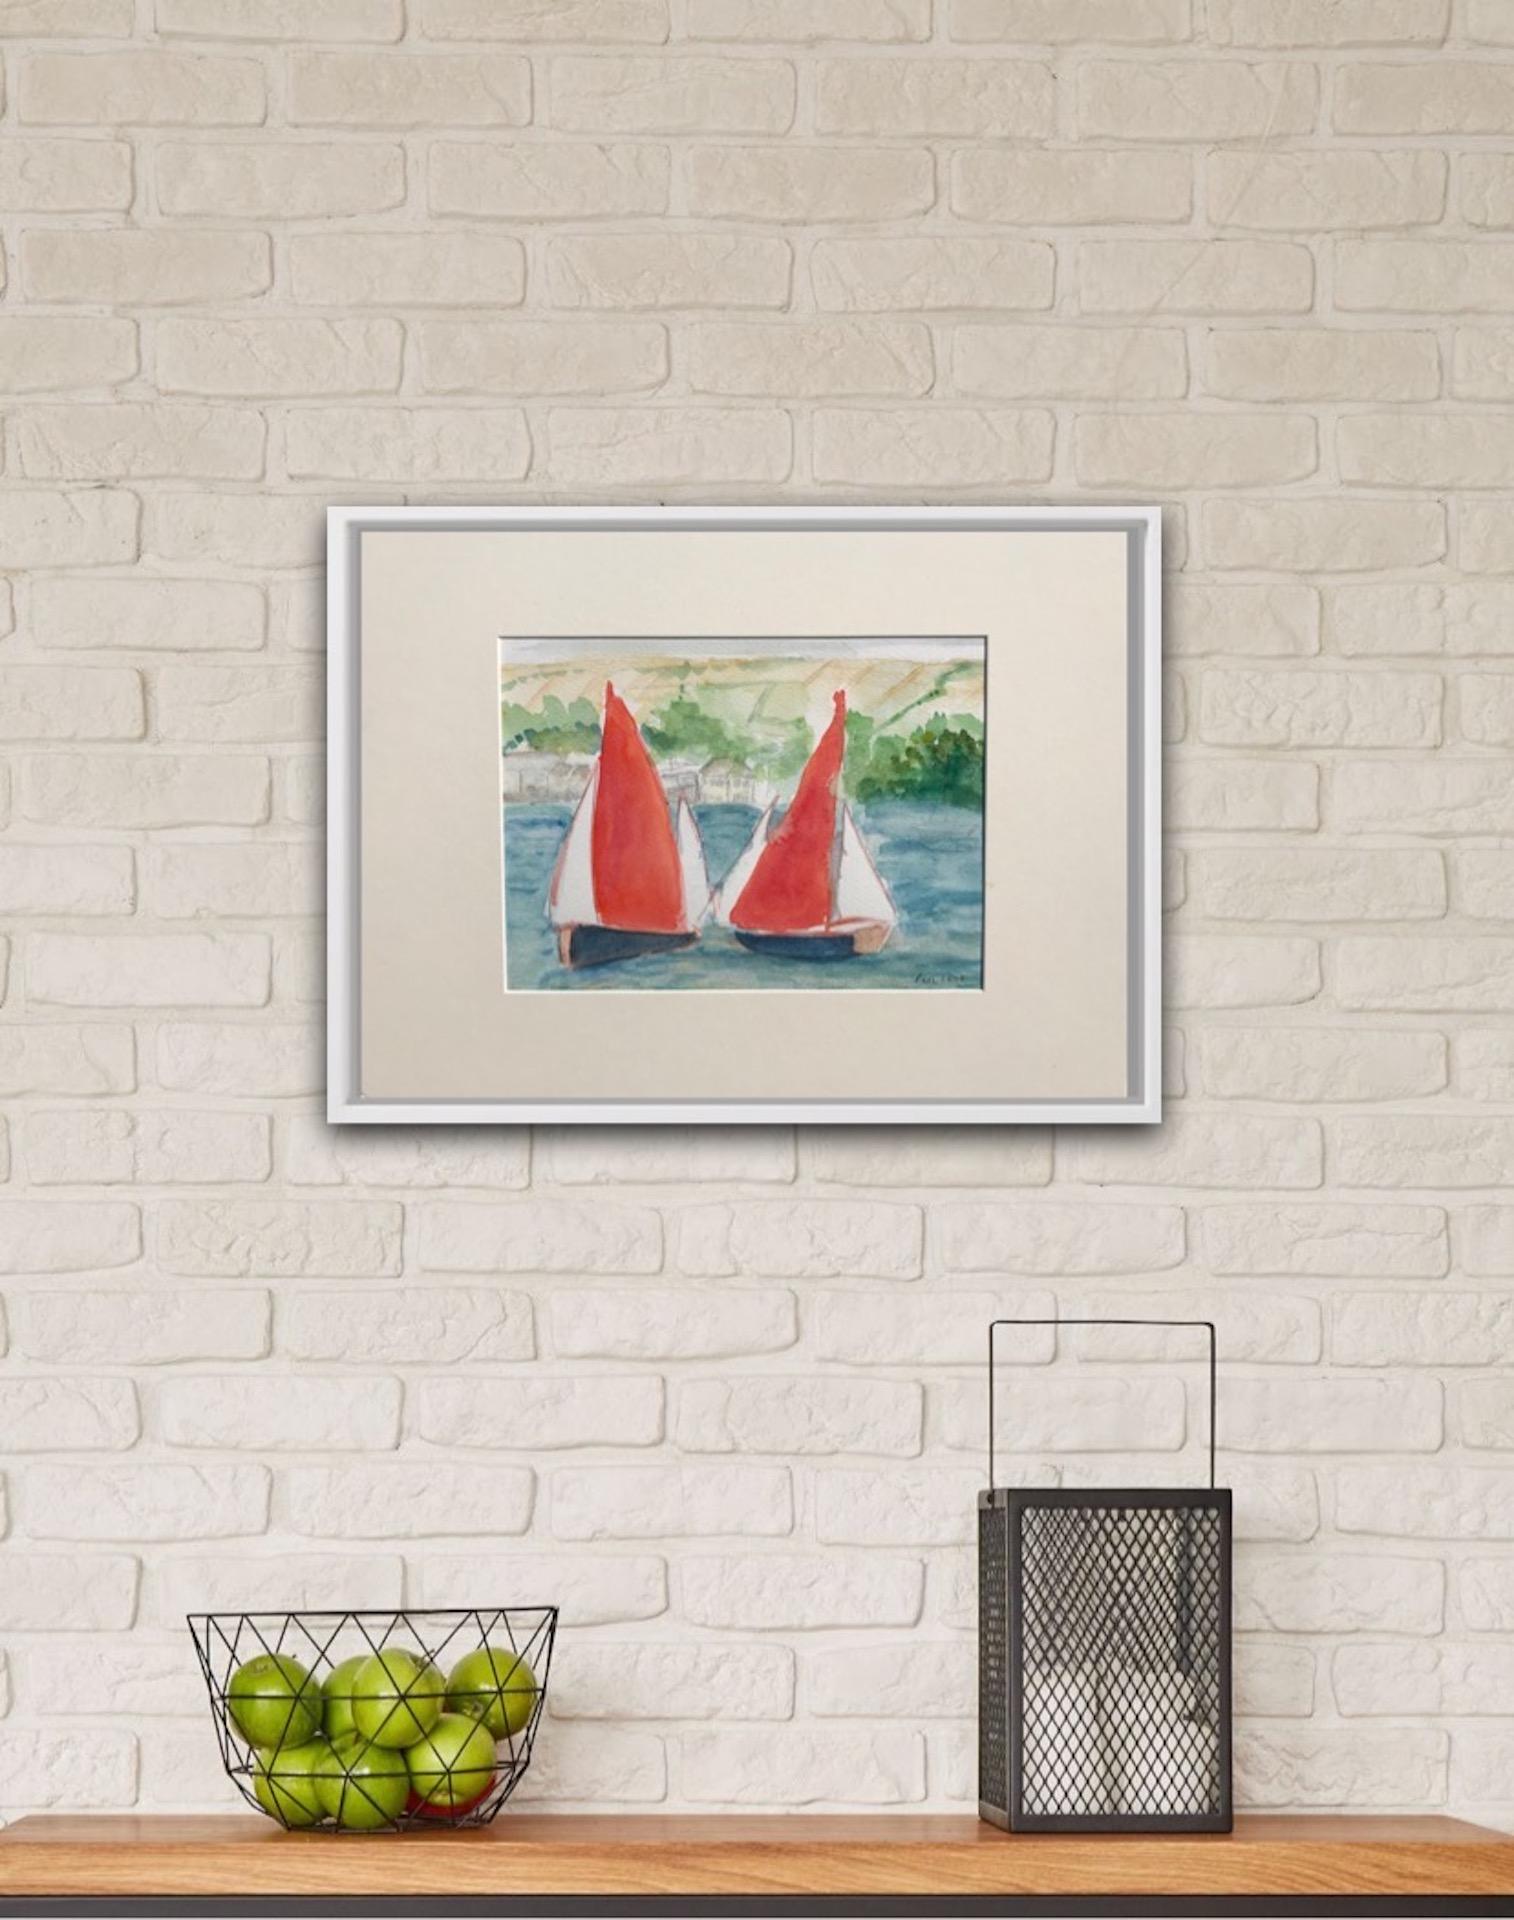 Peri Taylor
Salcombe Yawls Racing Study
Watercolour and Ink
Size: H 30cm x W 40cm
Sold Unframed
(Please note that in situ images are purely an indication of how a piece may look).

Salcombe Yawls Racing Study is an original painting by Peri Taylor.